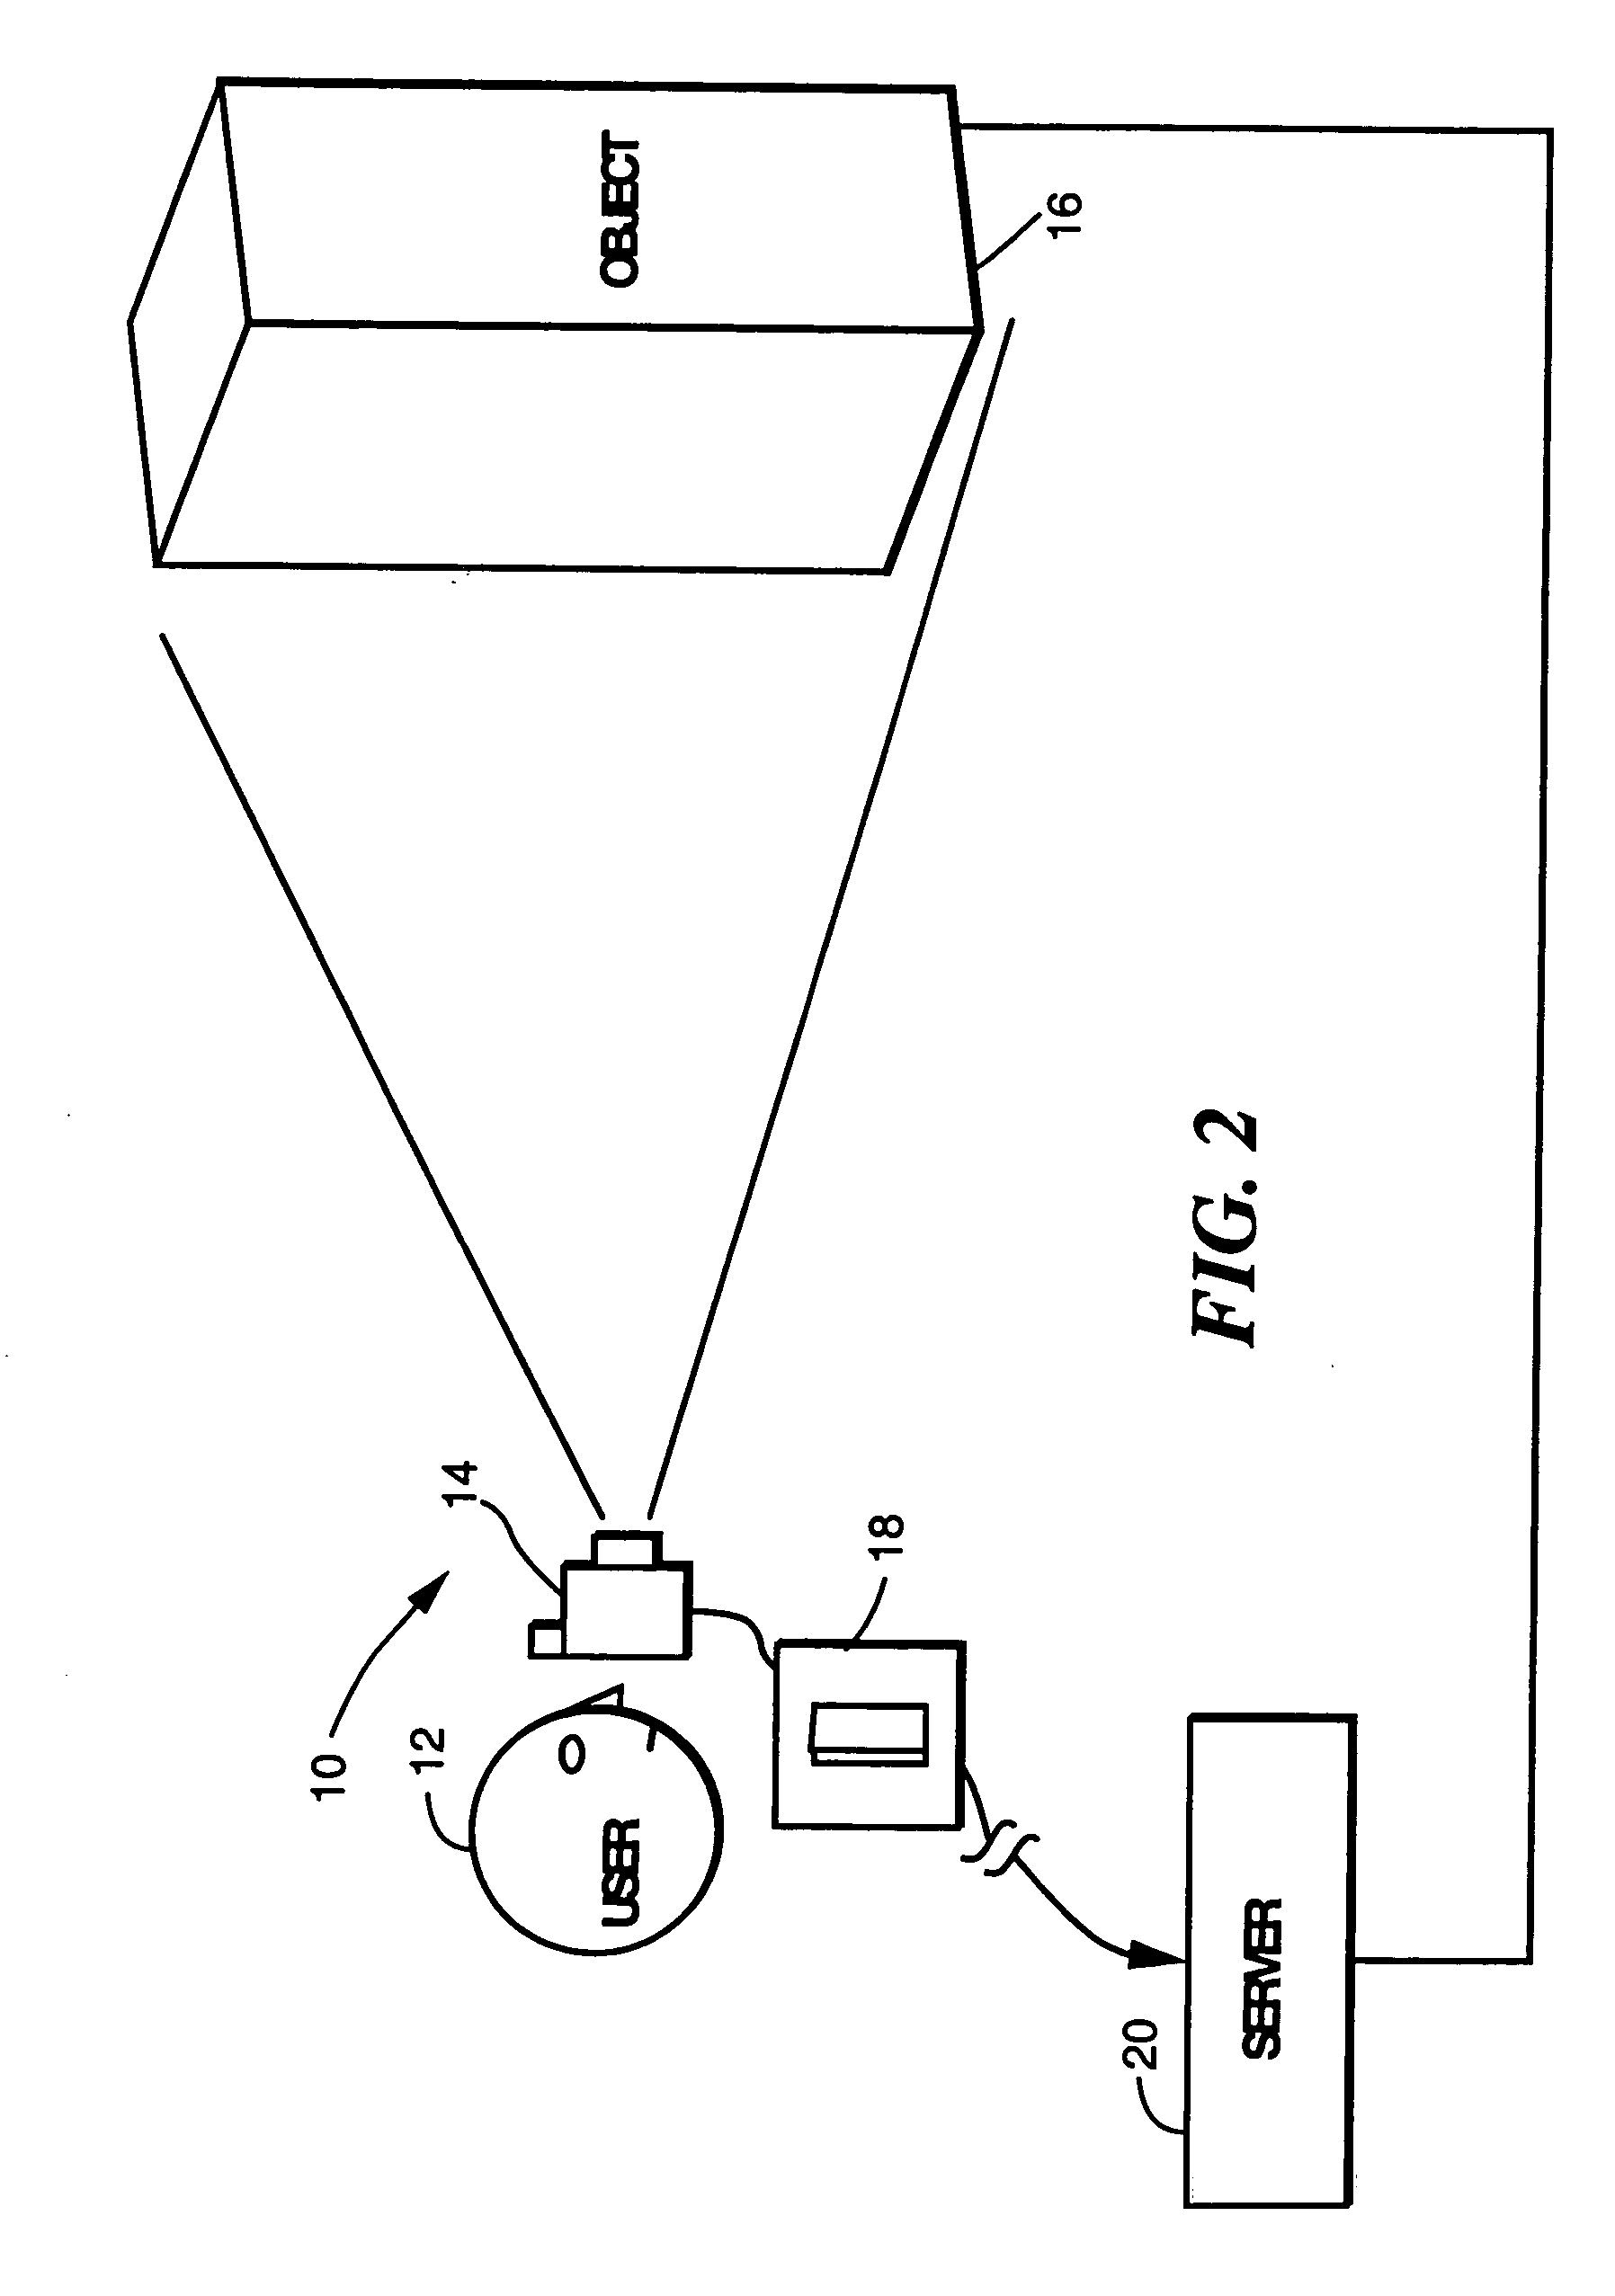 Image capture and identification system and process